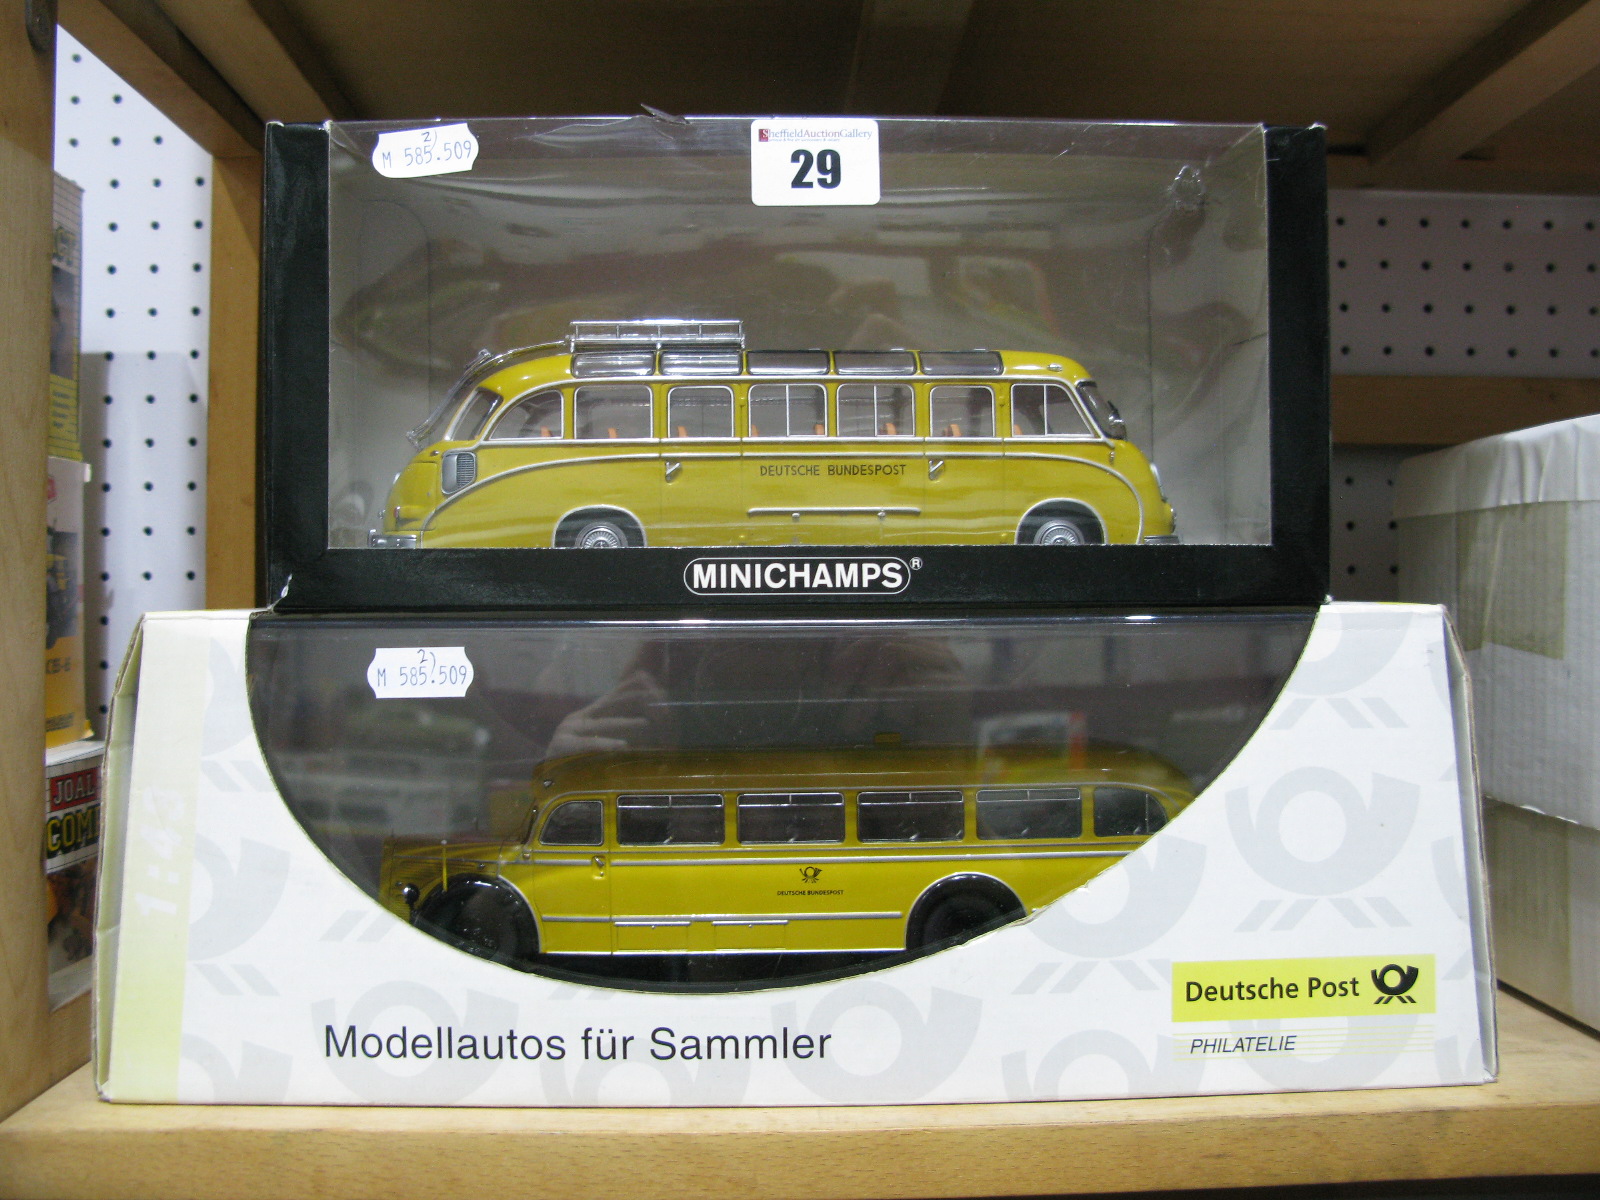 Two 1:43rd Scale Diecast Model 'Deutsche Bundespost' Liveried Mercedes Benz Buses, by Minichamps,